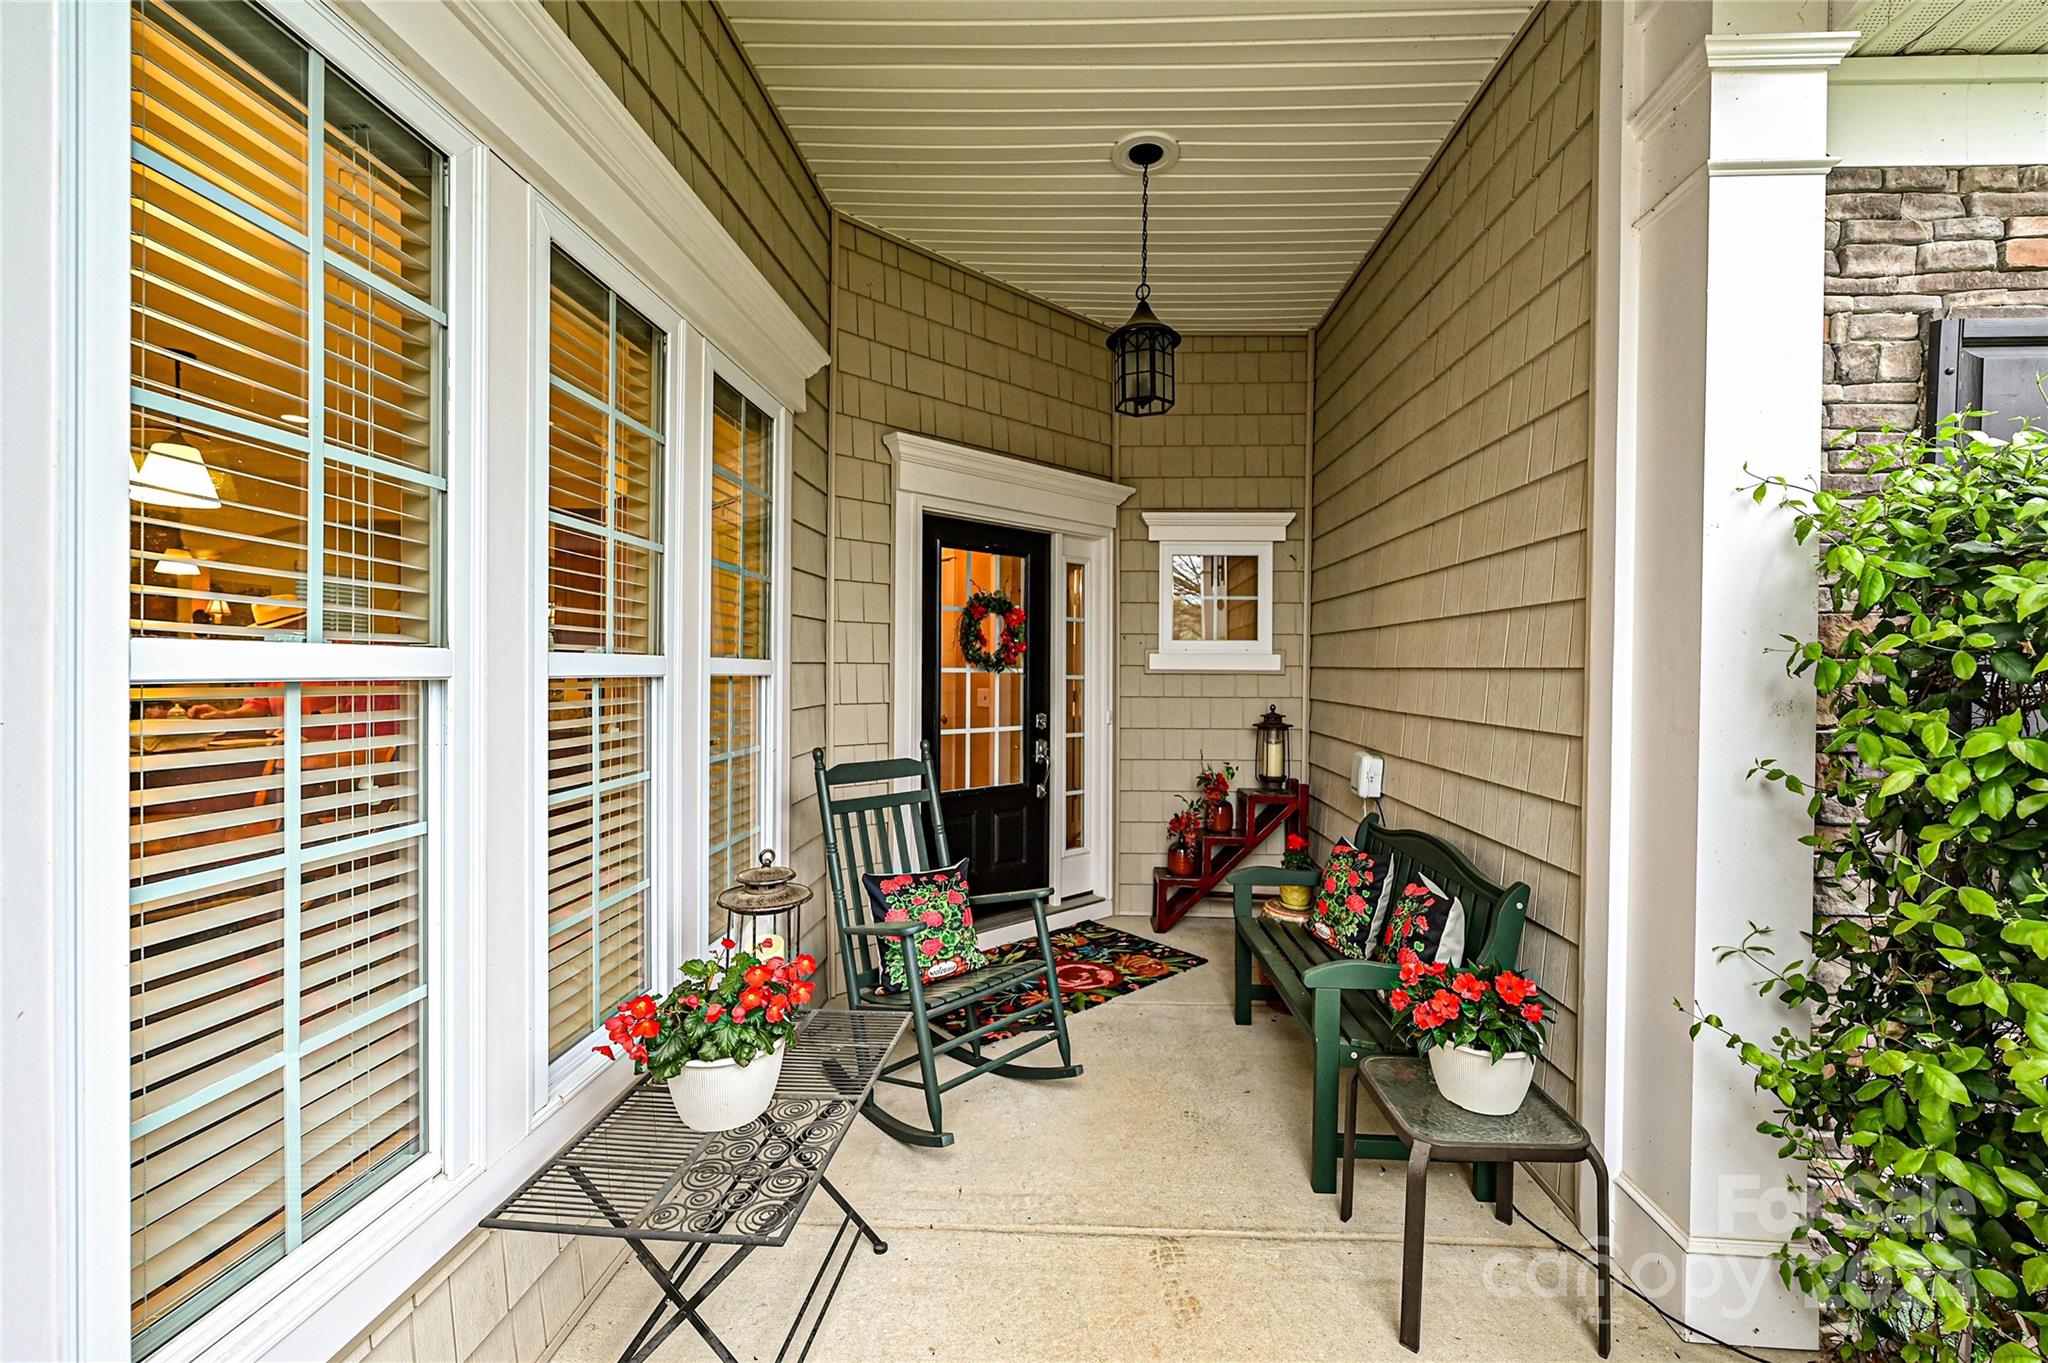 a view of a porch with dining table and chairs and potted plants